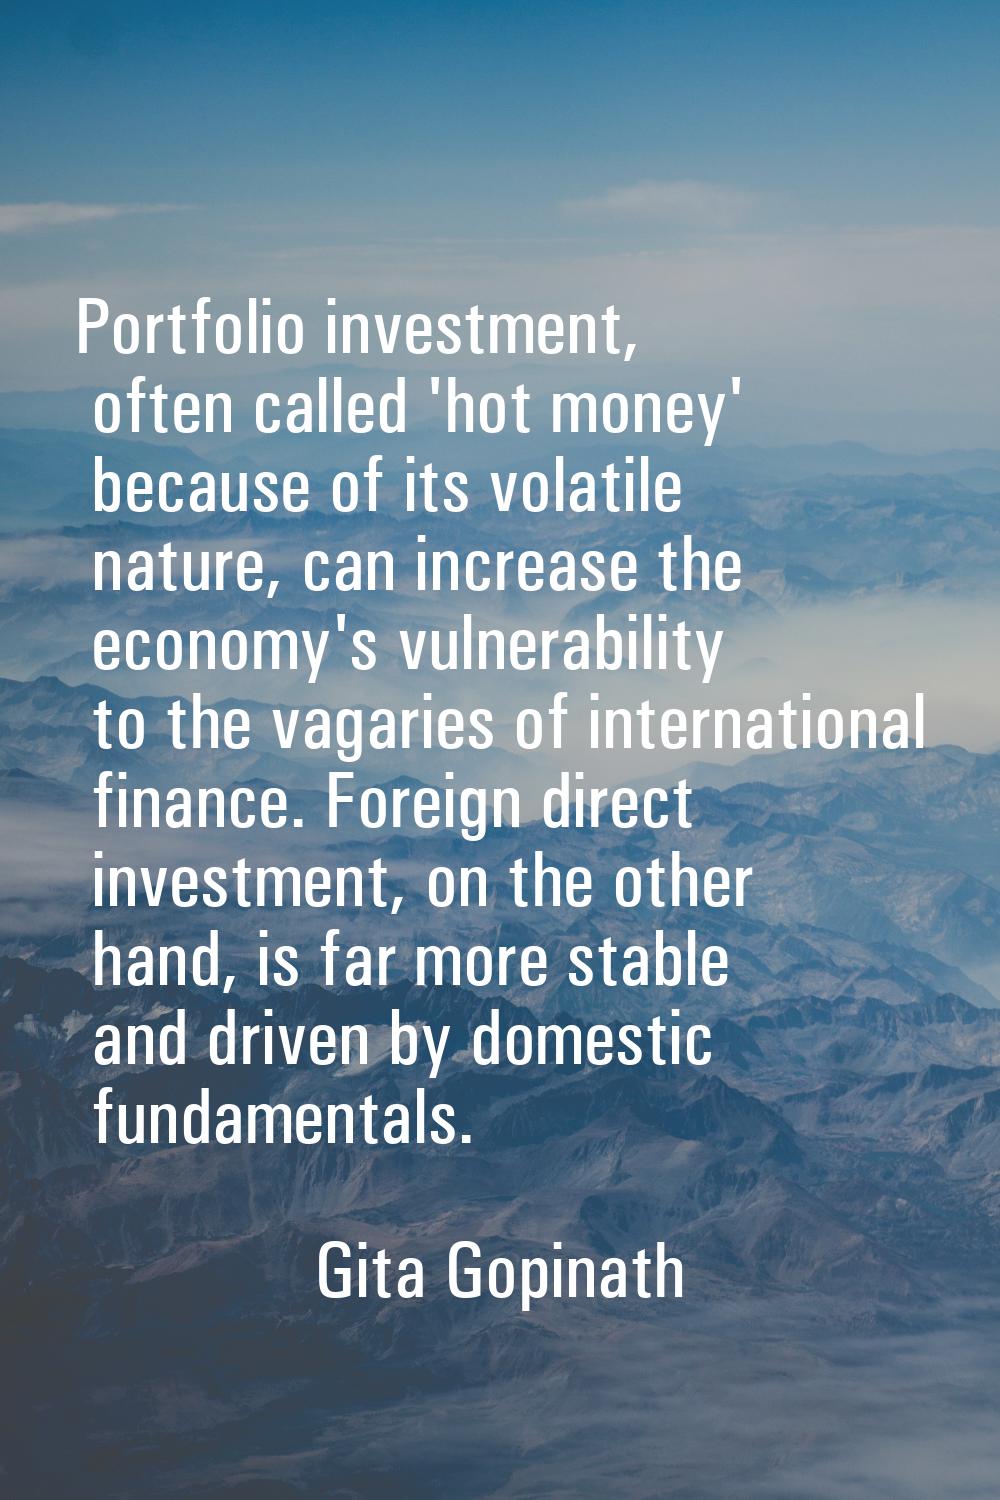 Portfolio investment, often called 'hot money' because of its volatile nature, can increase the eco